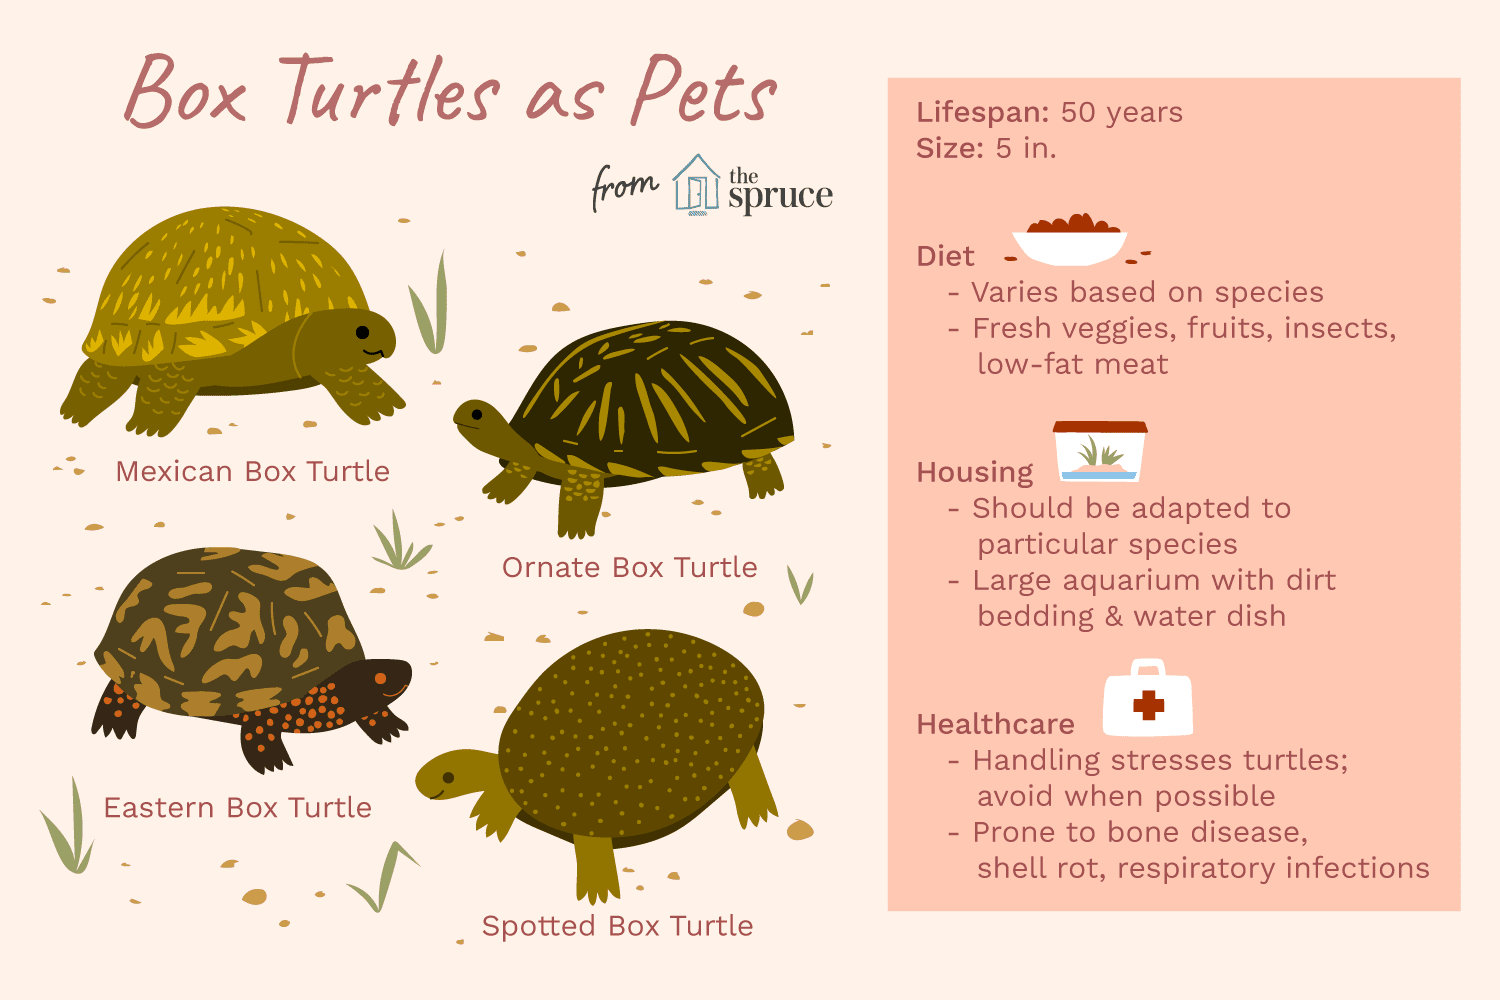 box turtles as pets care information